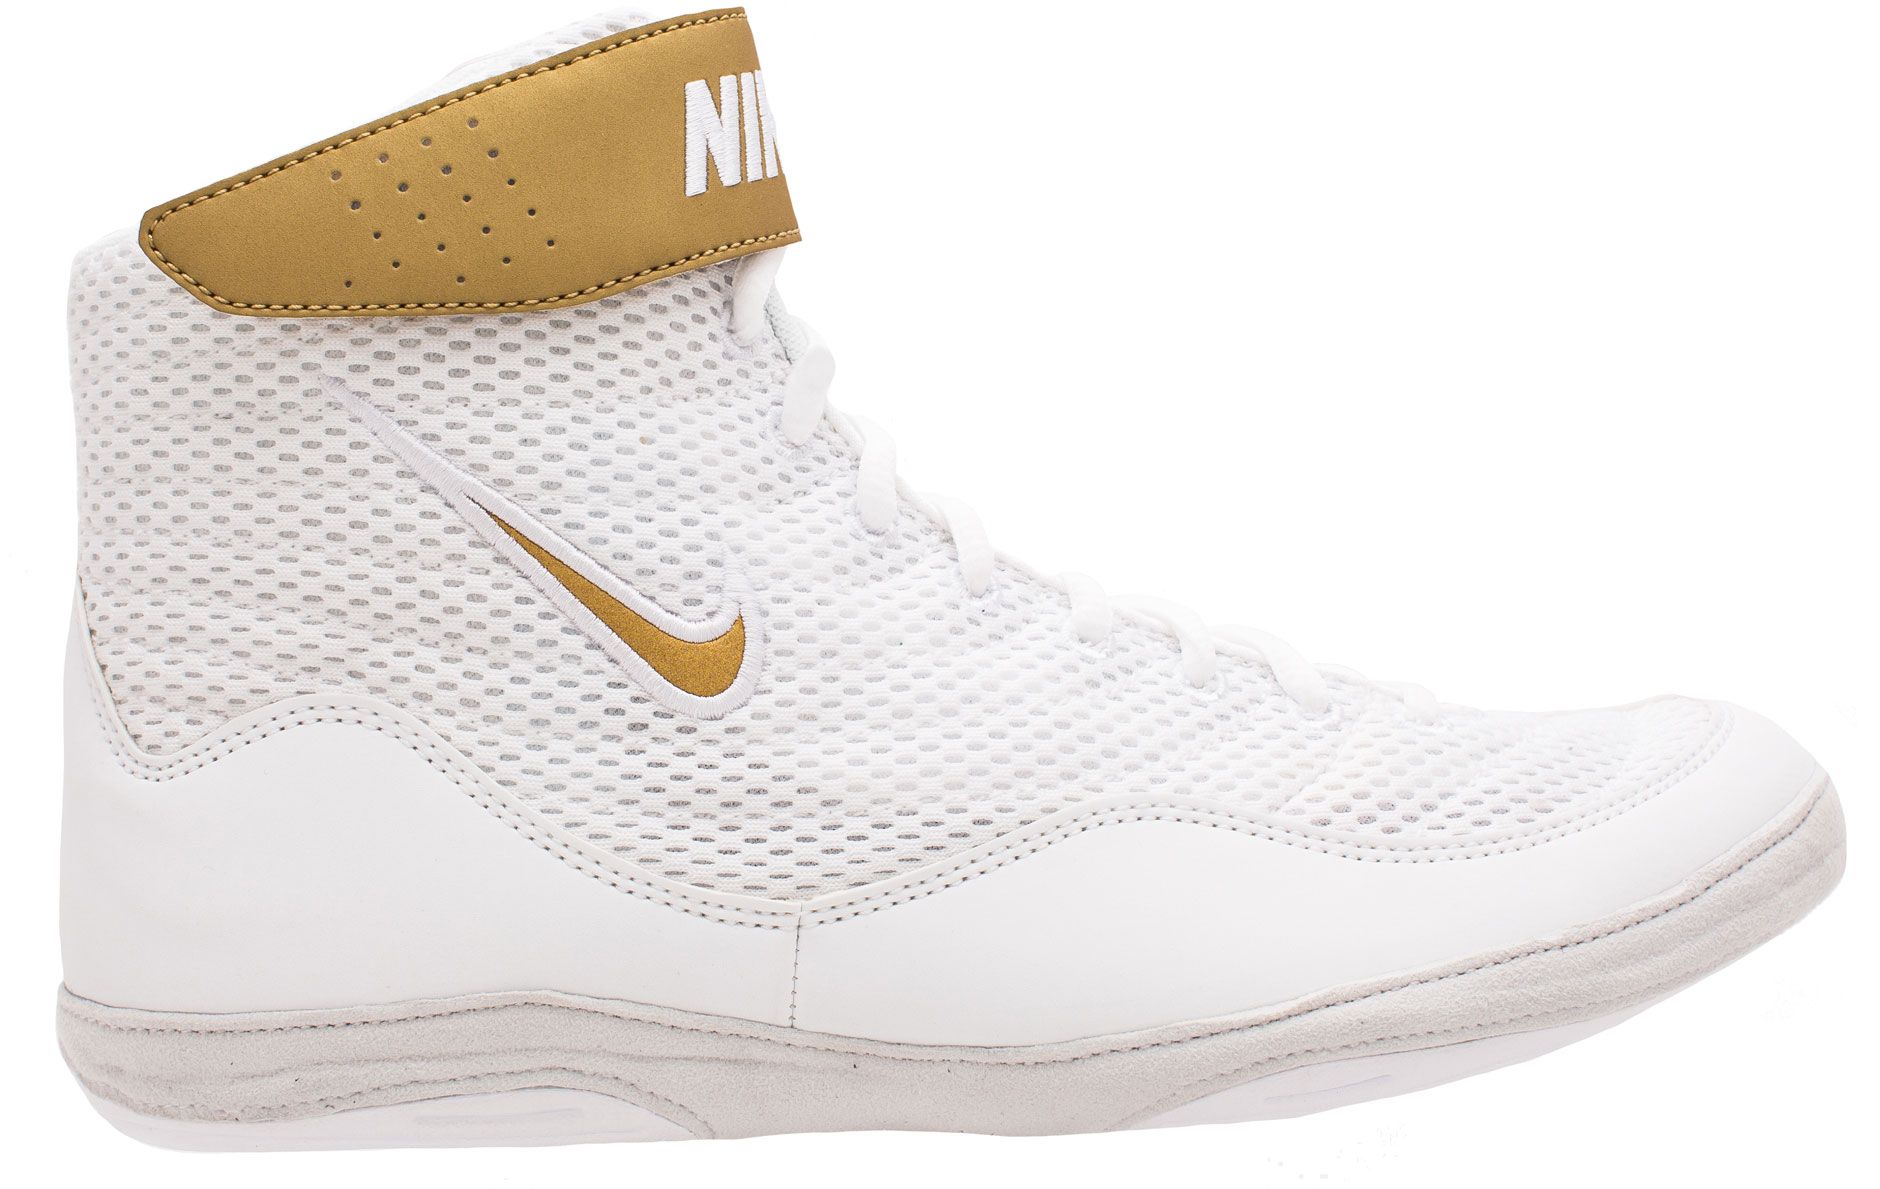 nike freeks wrestling shoes white and gold